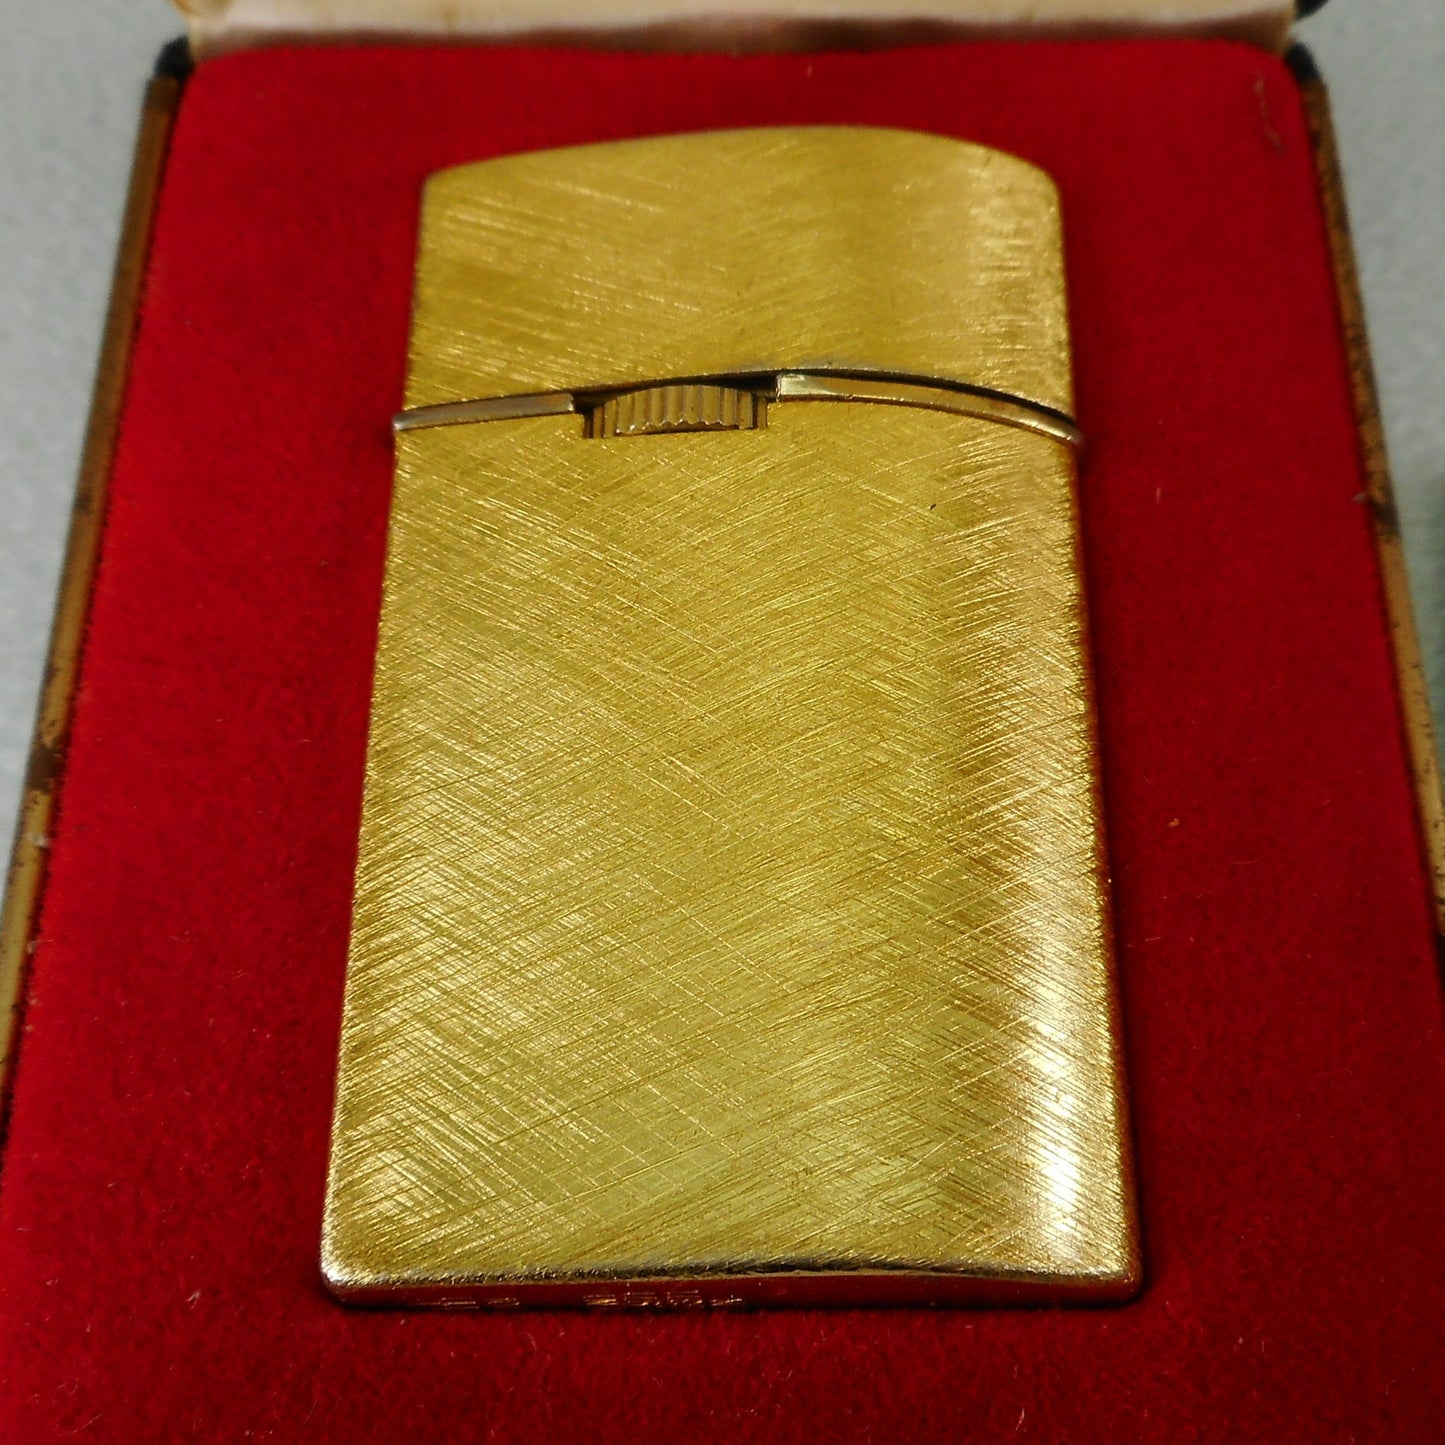 Swank J2 Windproof Butane Lighter with Case Papers  - Brushed Gold Tone Vintage